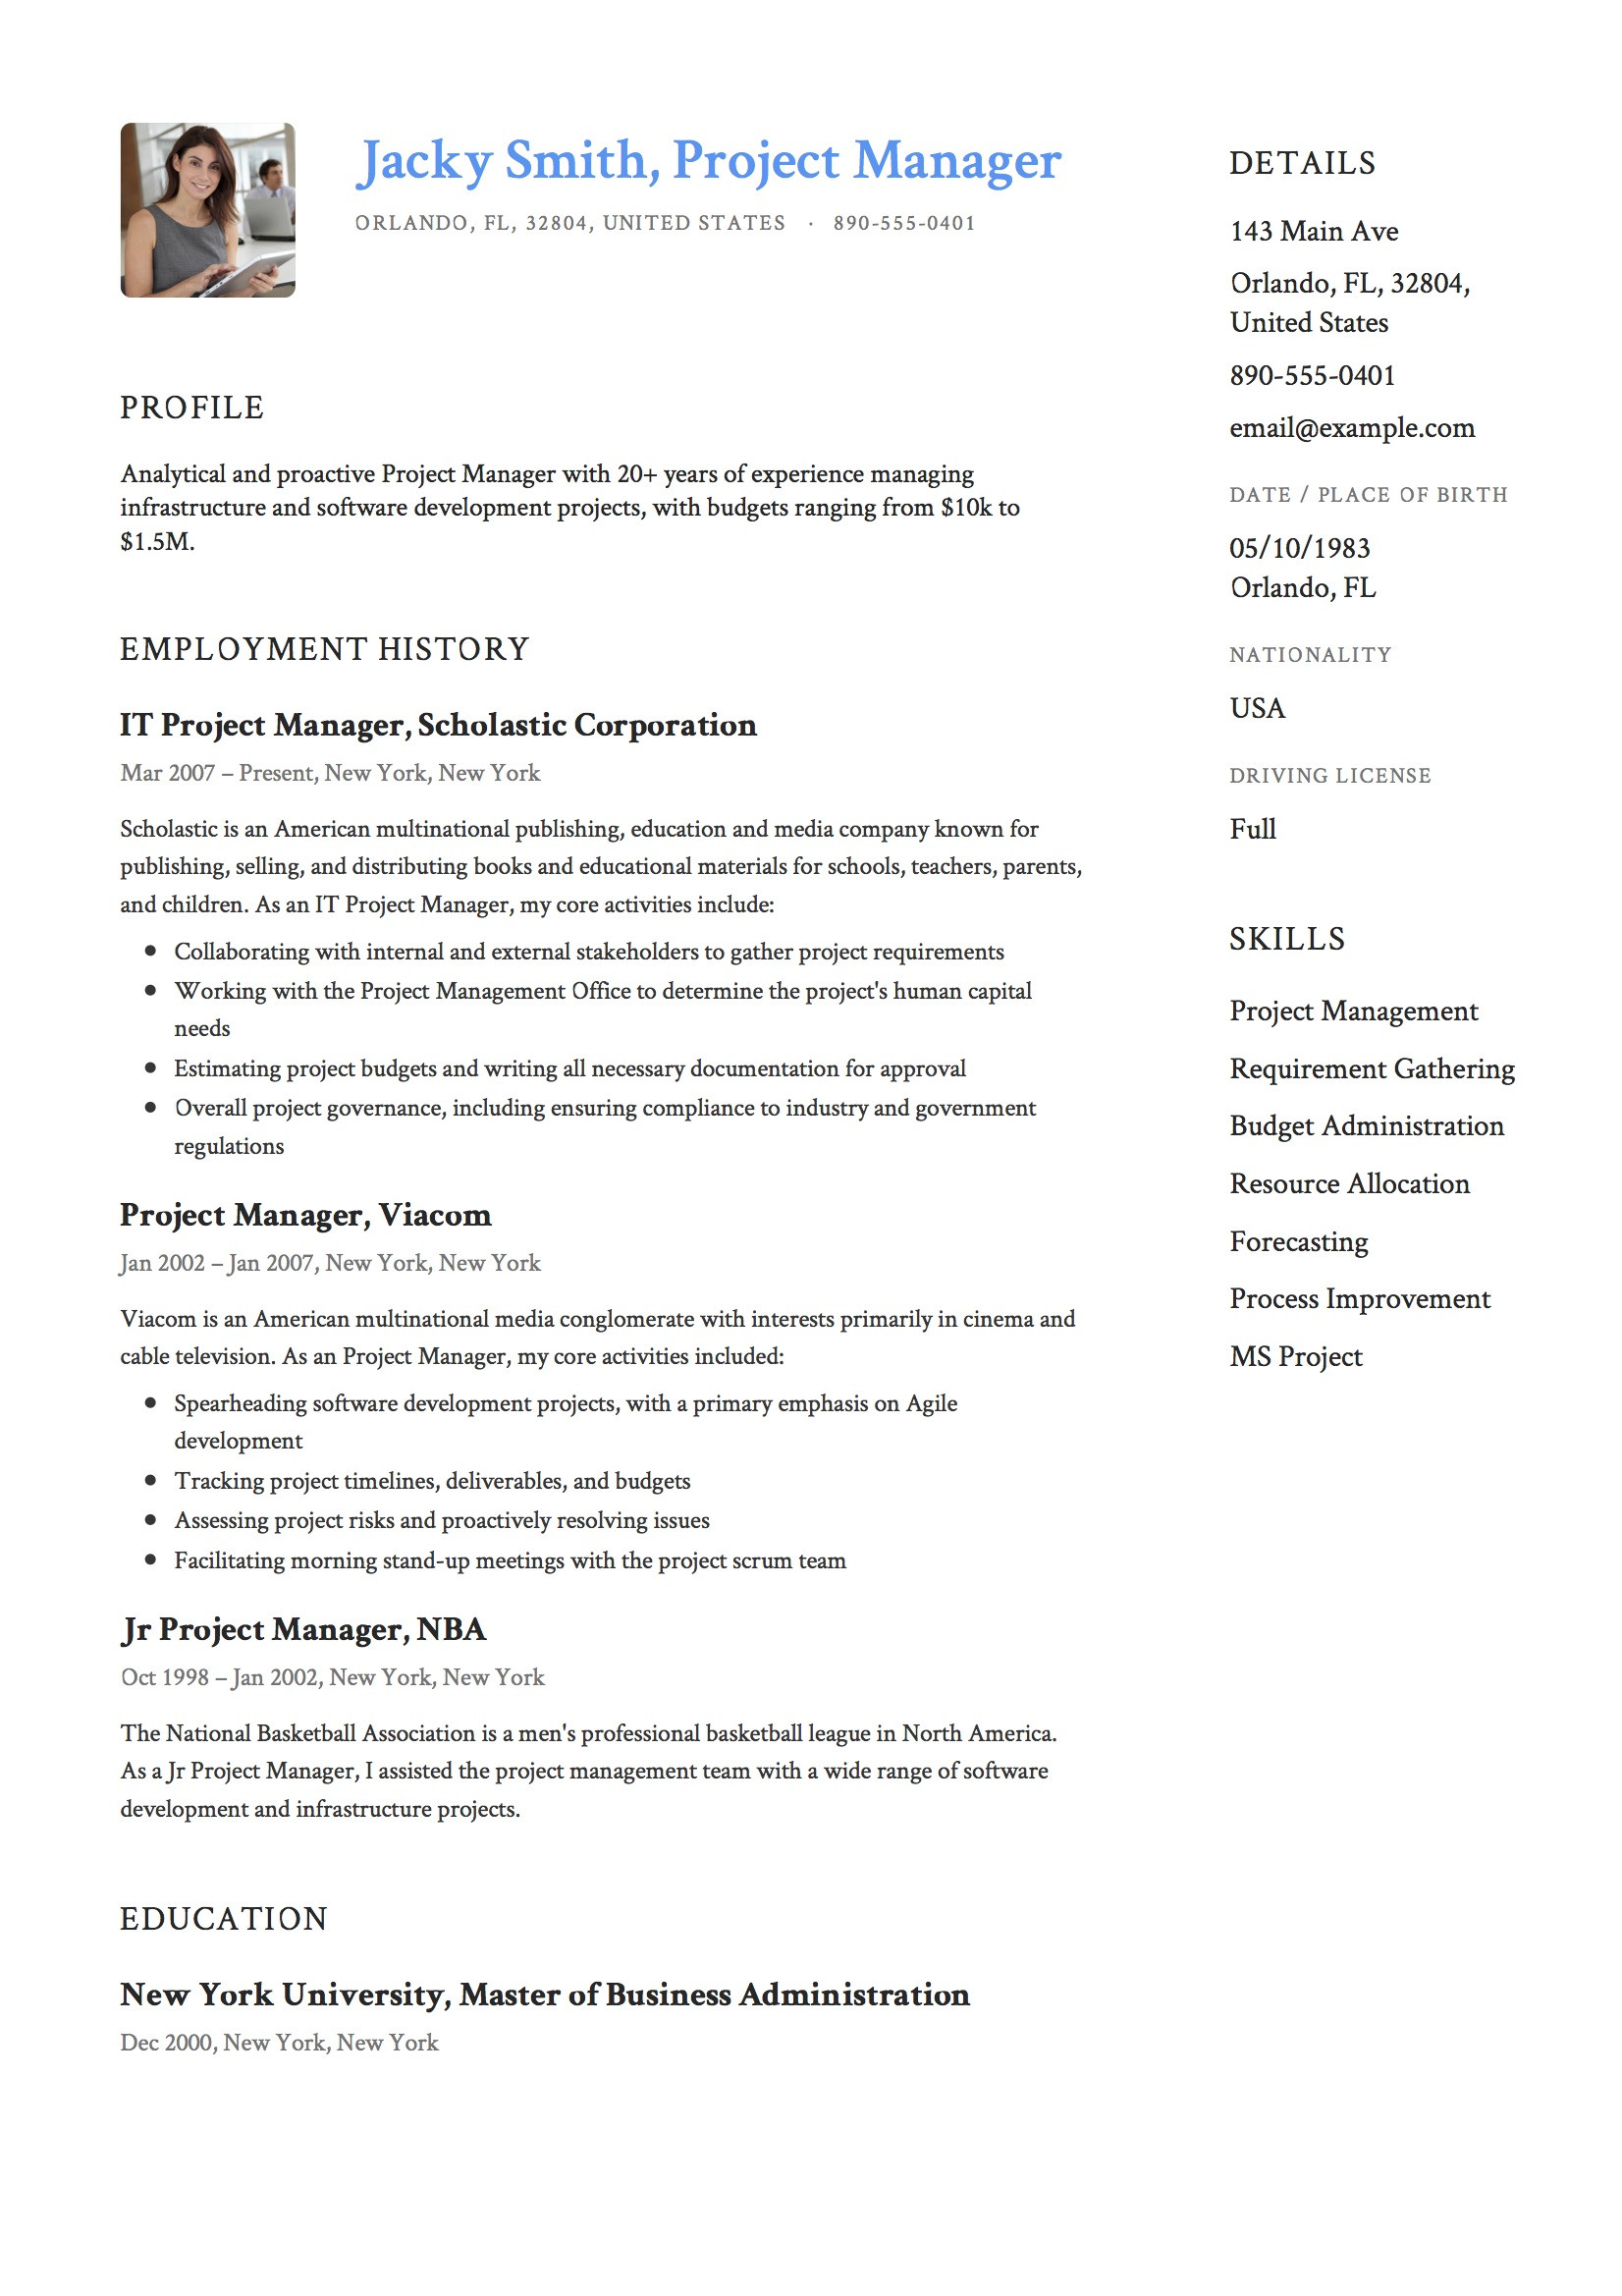 Software Project Manager Resume Sample India 20 Project Manager Resume Examples & Full Guide Pdf & Word 2021